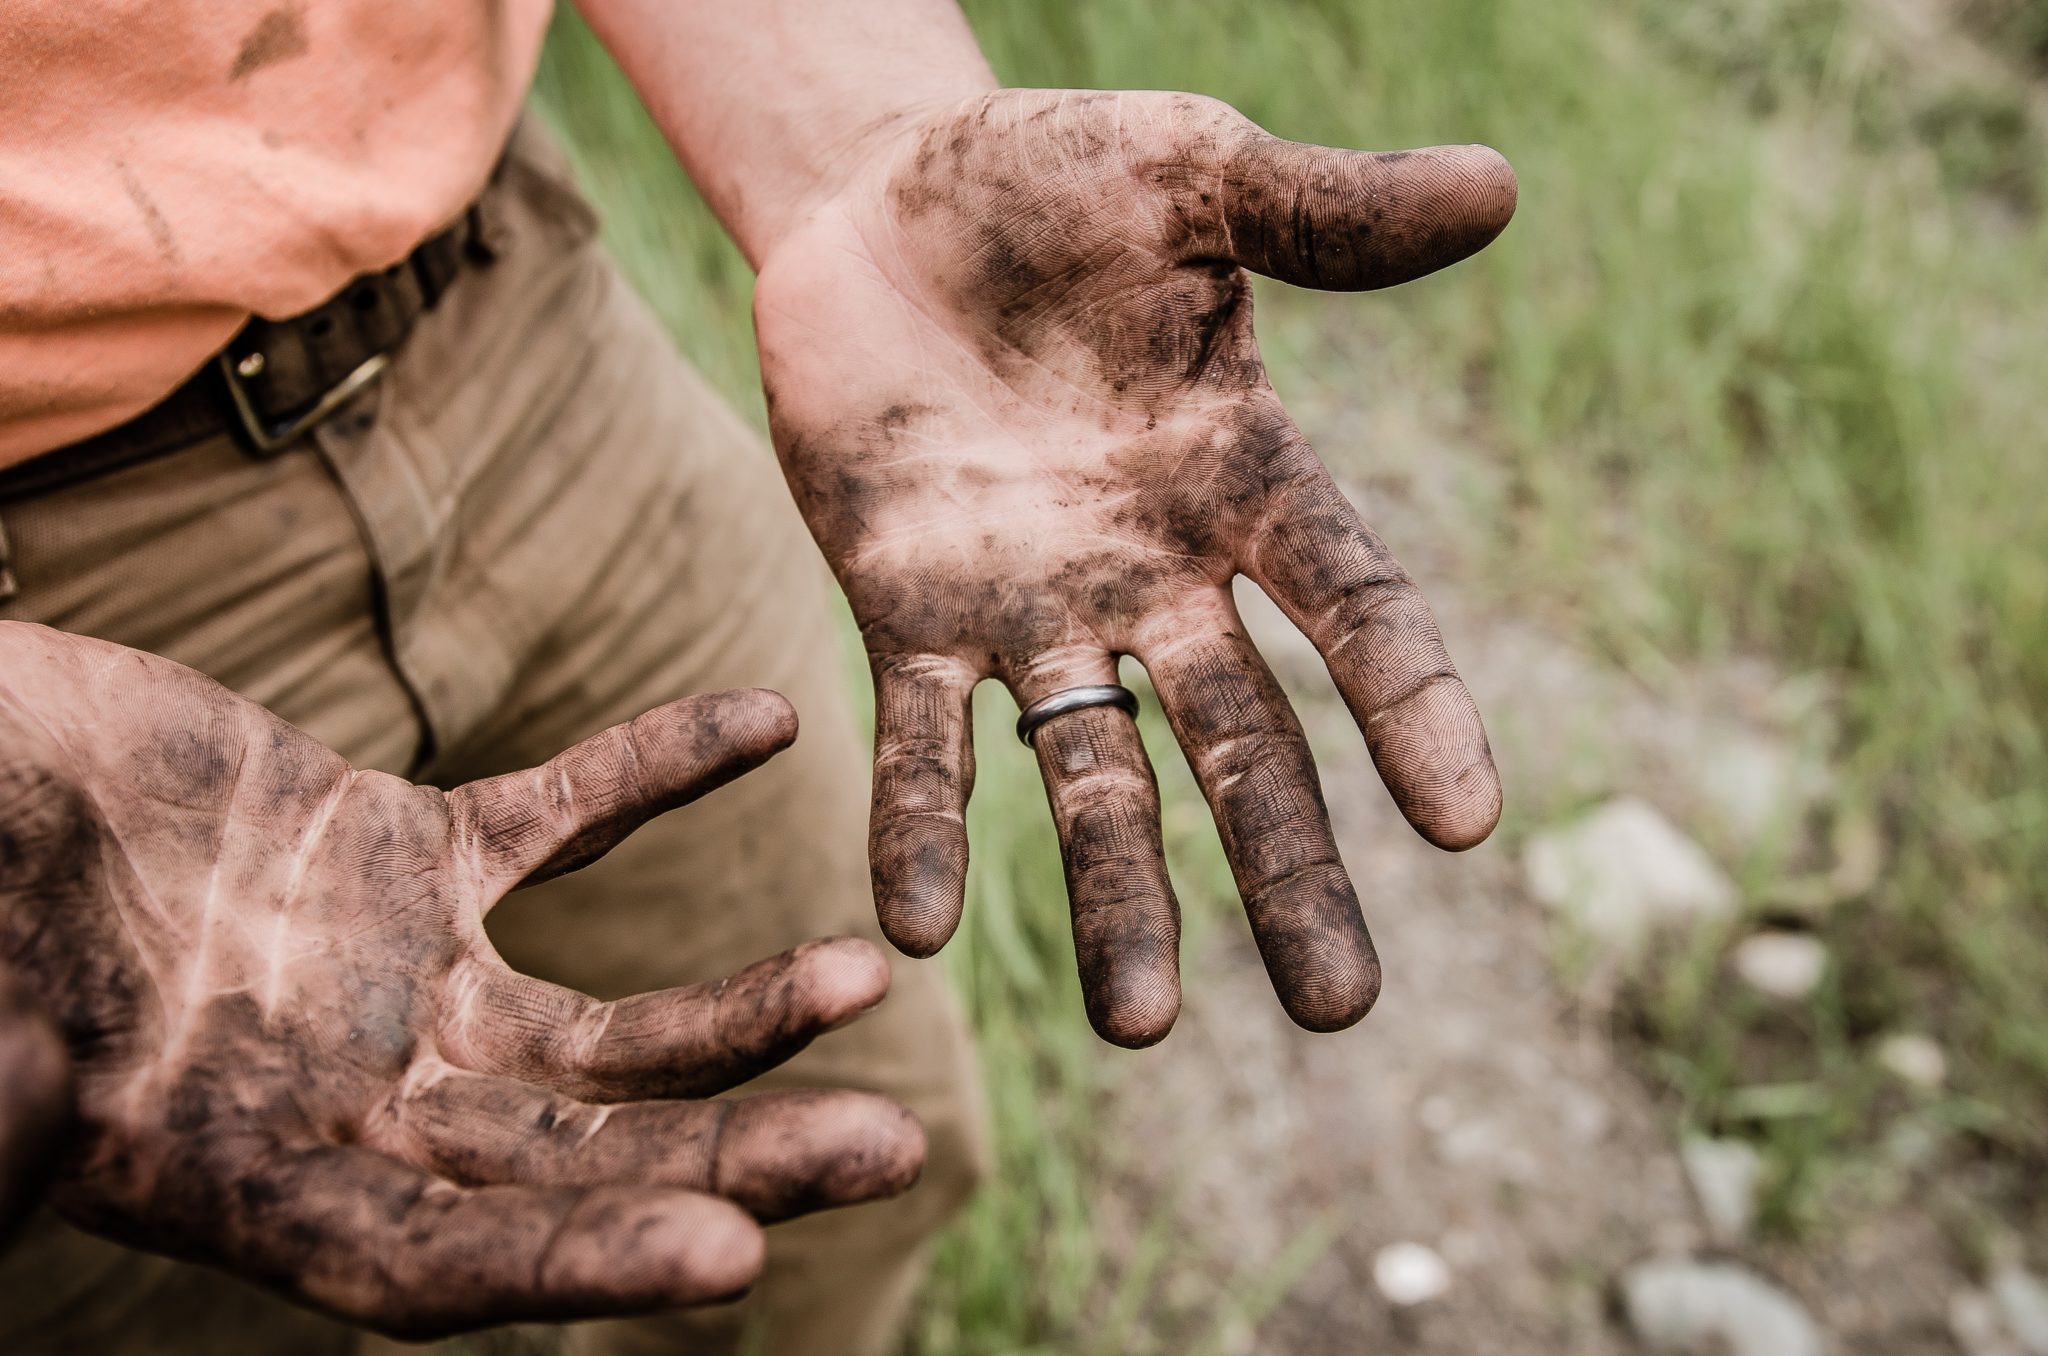 Get Your Hands Dirty by Starting Lean